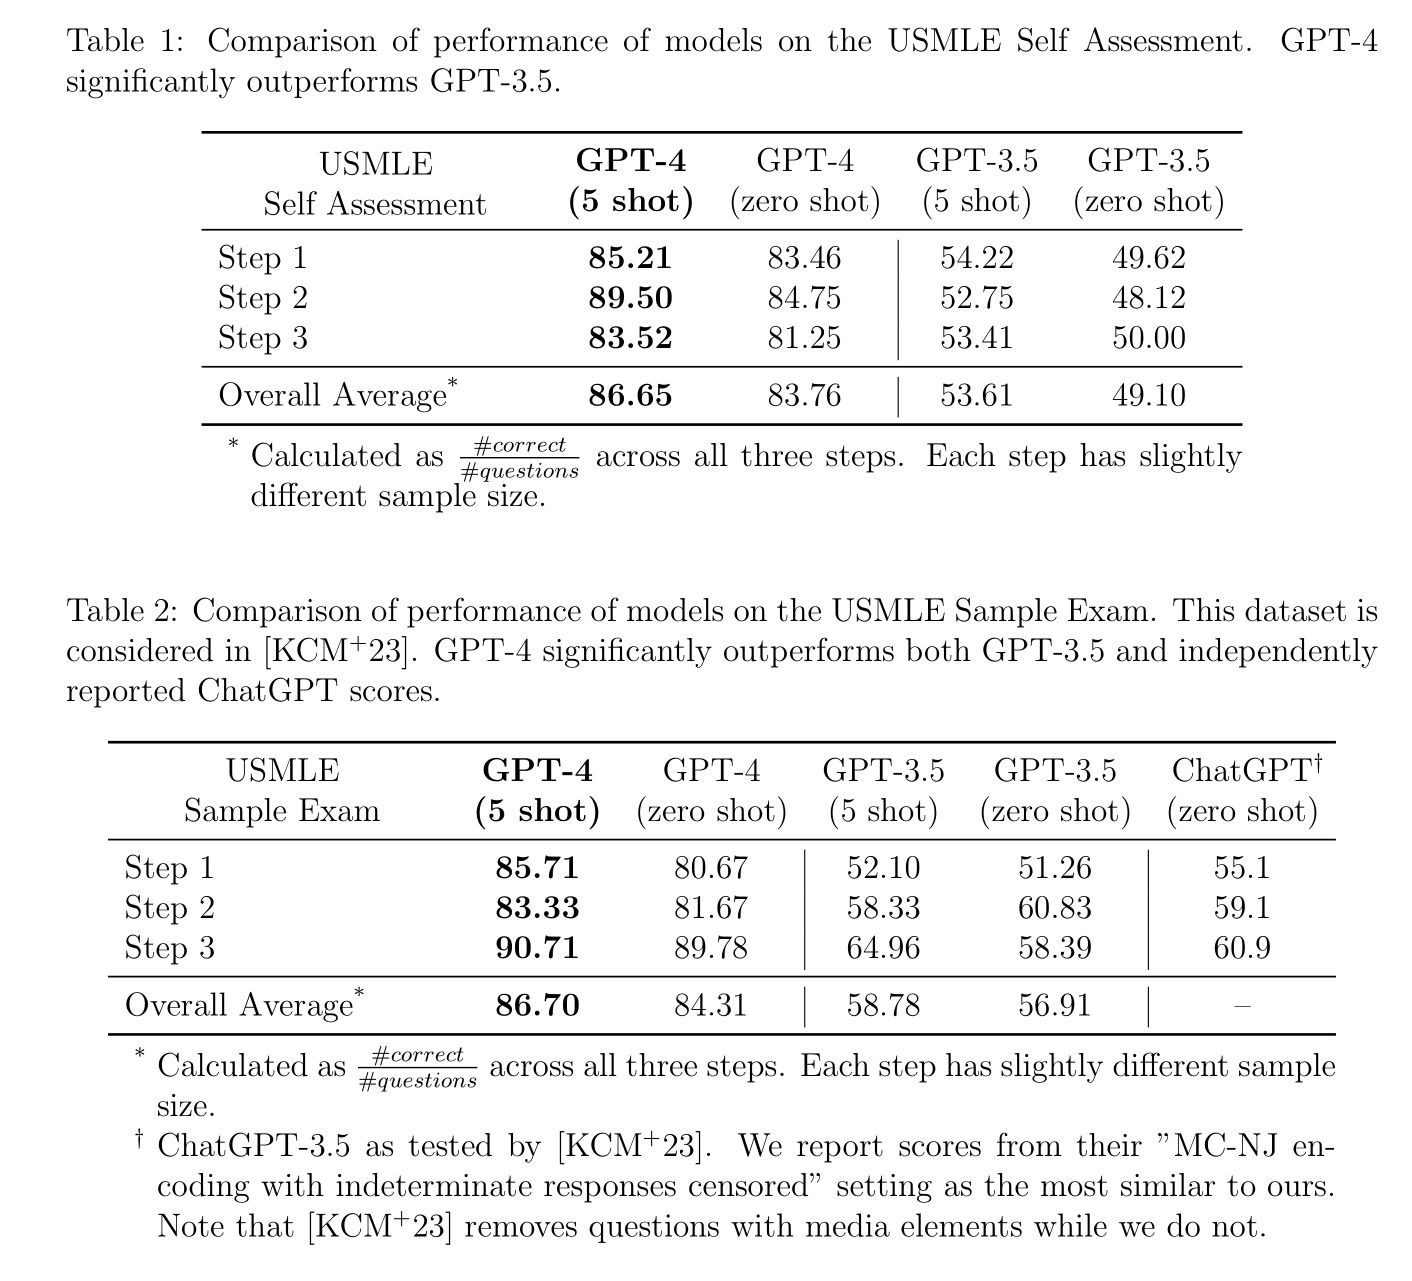 Table 1: Comparison of performance of models on the USMLE Self Assessment. GPT-4 significantly outperforms GPT-3.5.